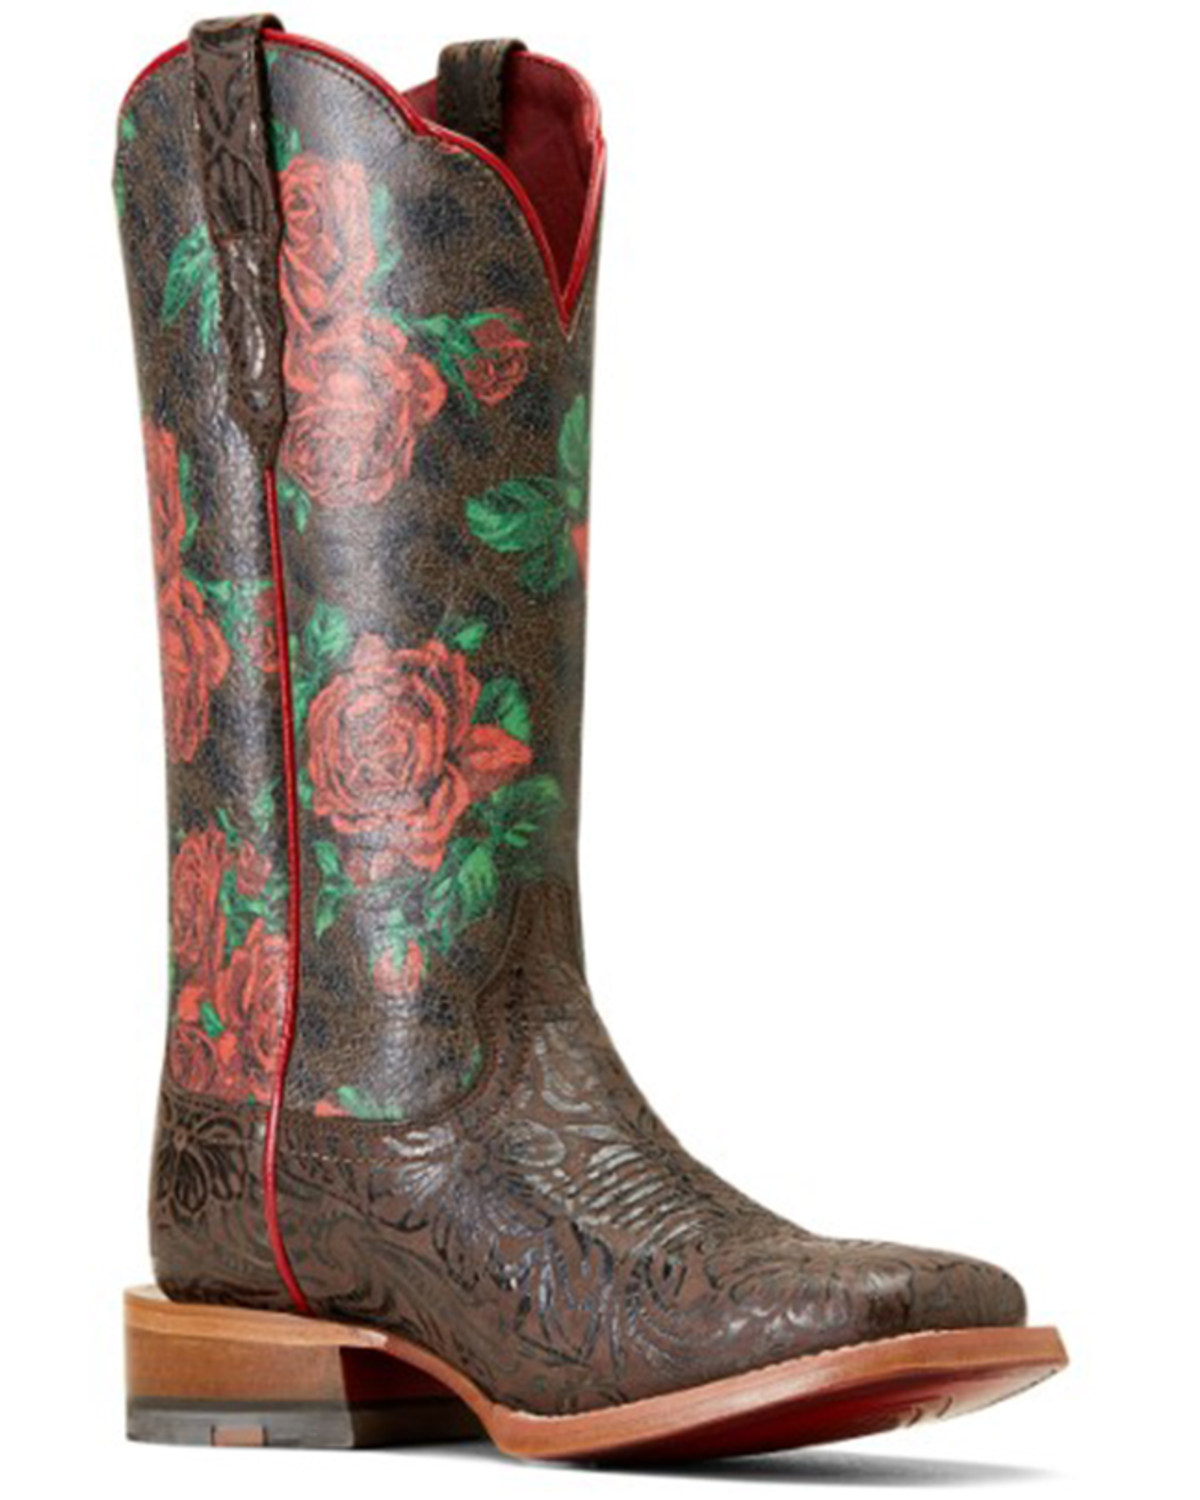 Ariat Women's Frontier Farrah Western Boots - Broad Square Toe